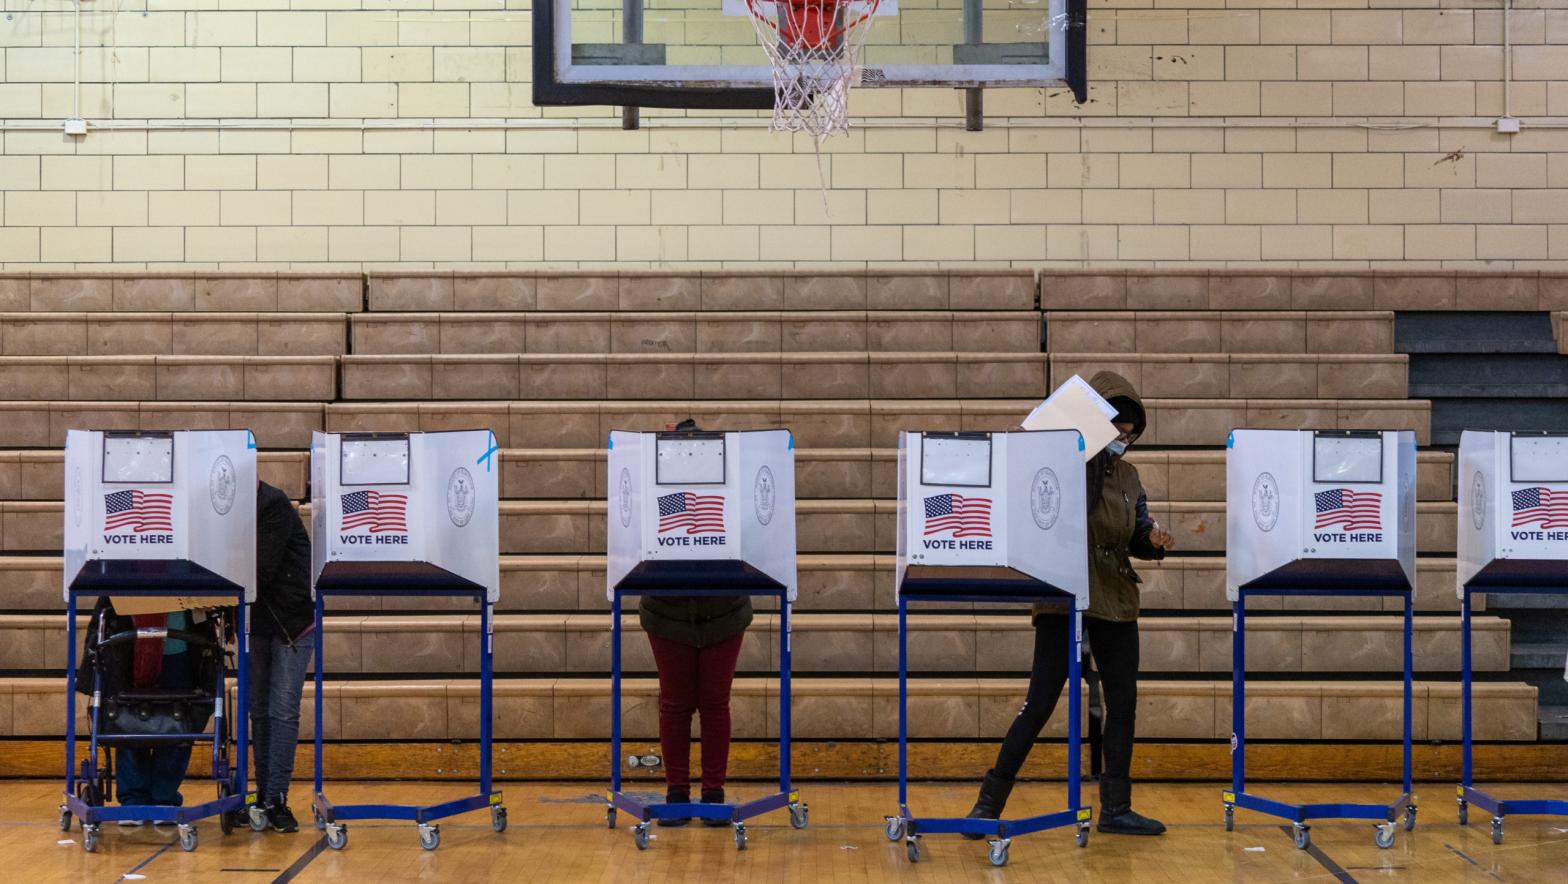 A voter fills out their ballot at Mitchel Community Centre on November 3, 2020, in the Bronx borough of New York City. (Photo: David Dee Delgado, Getty Images)